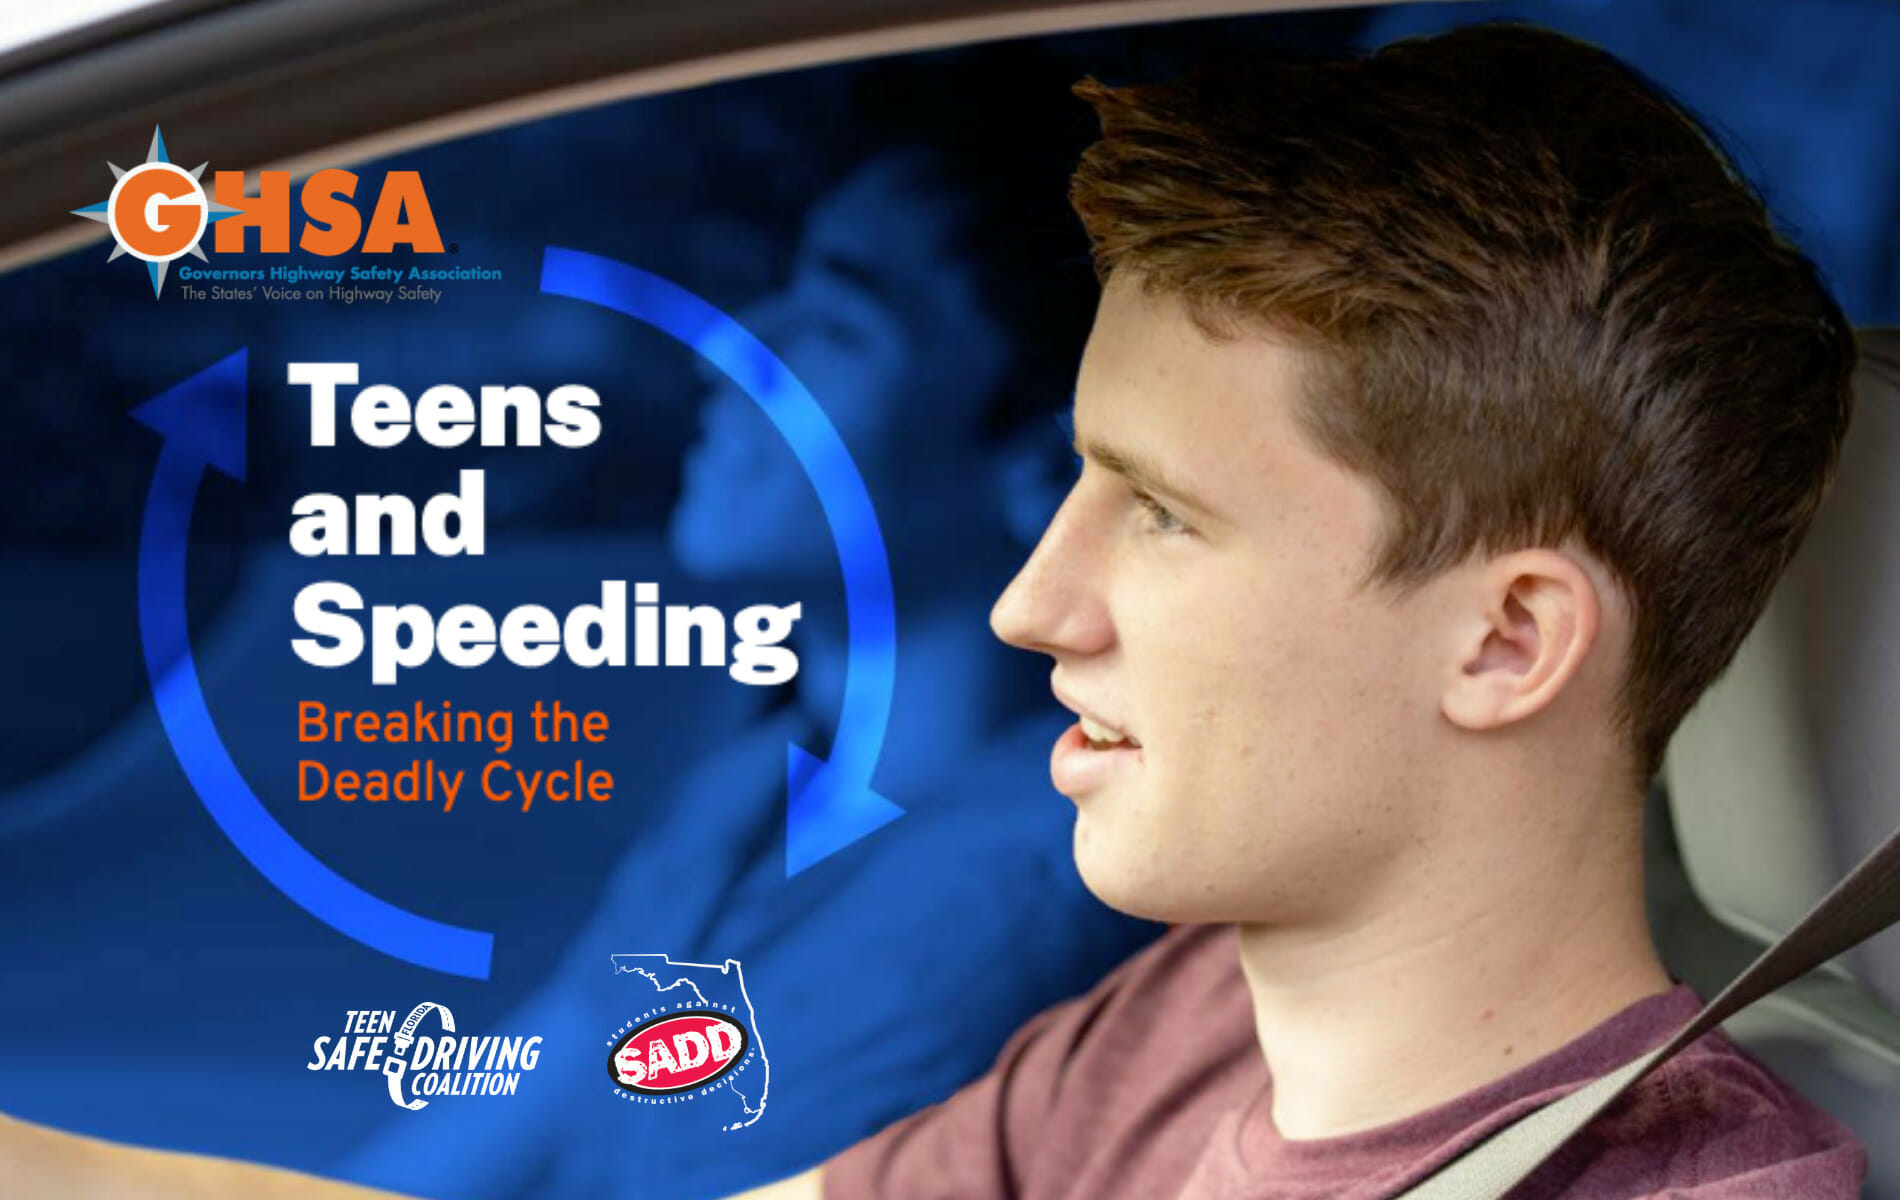 Teens and Speeding: Breaking the Deadly Cycle